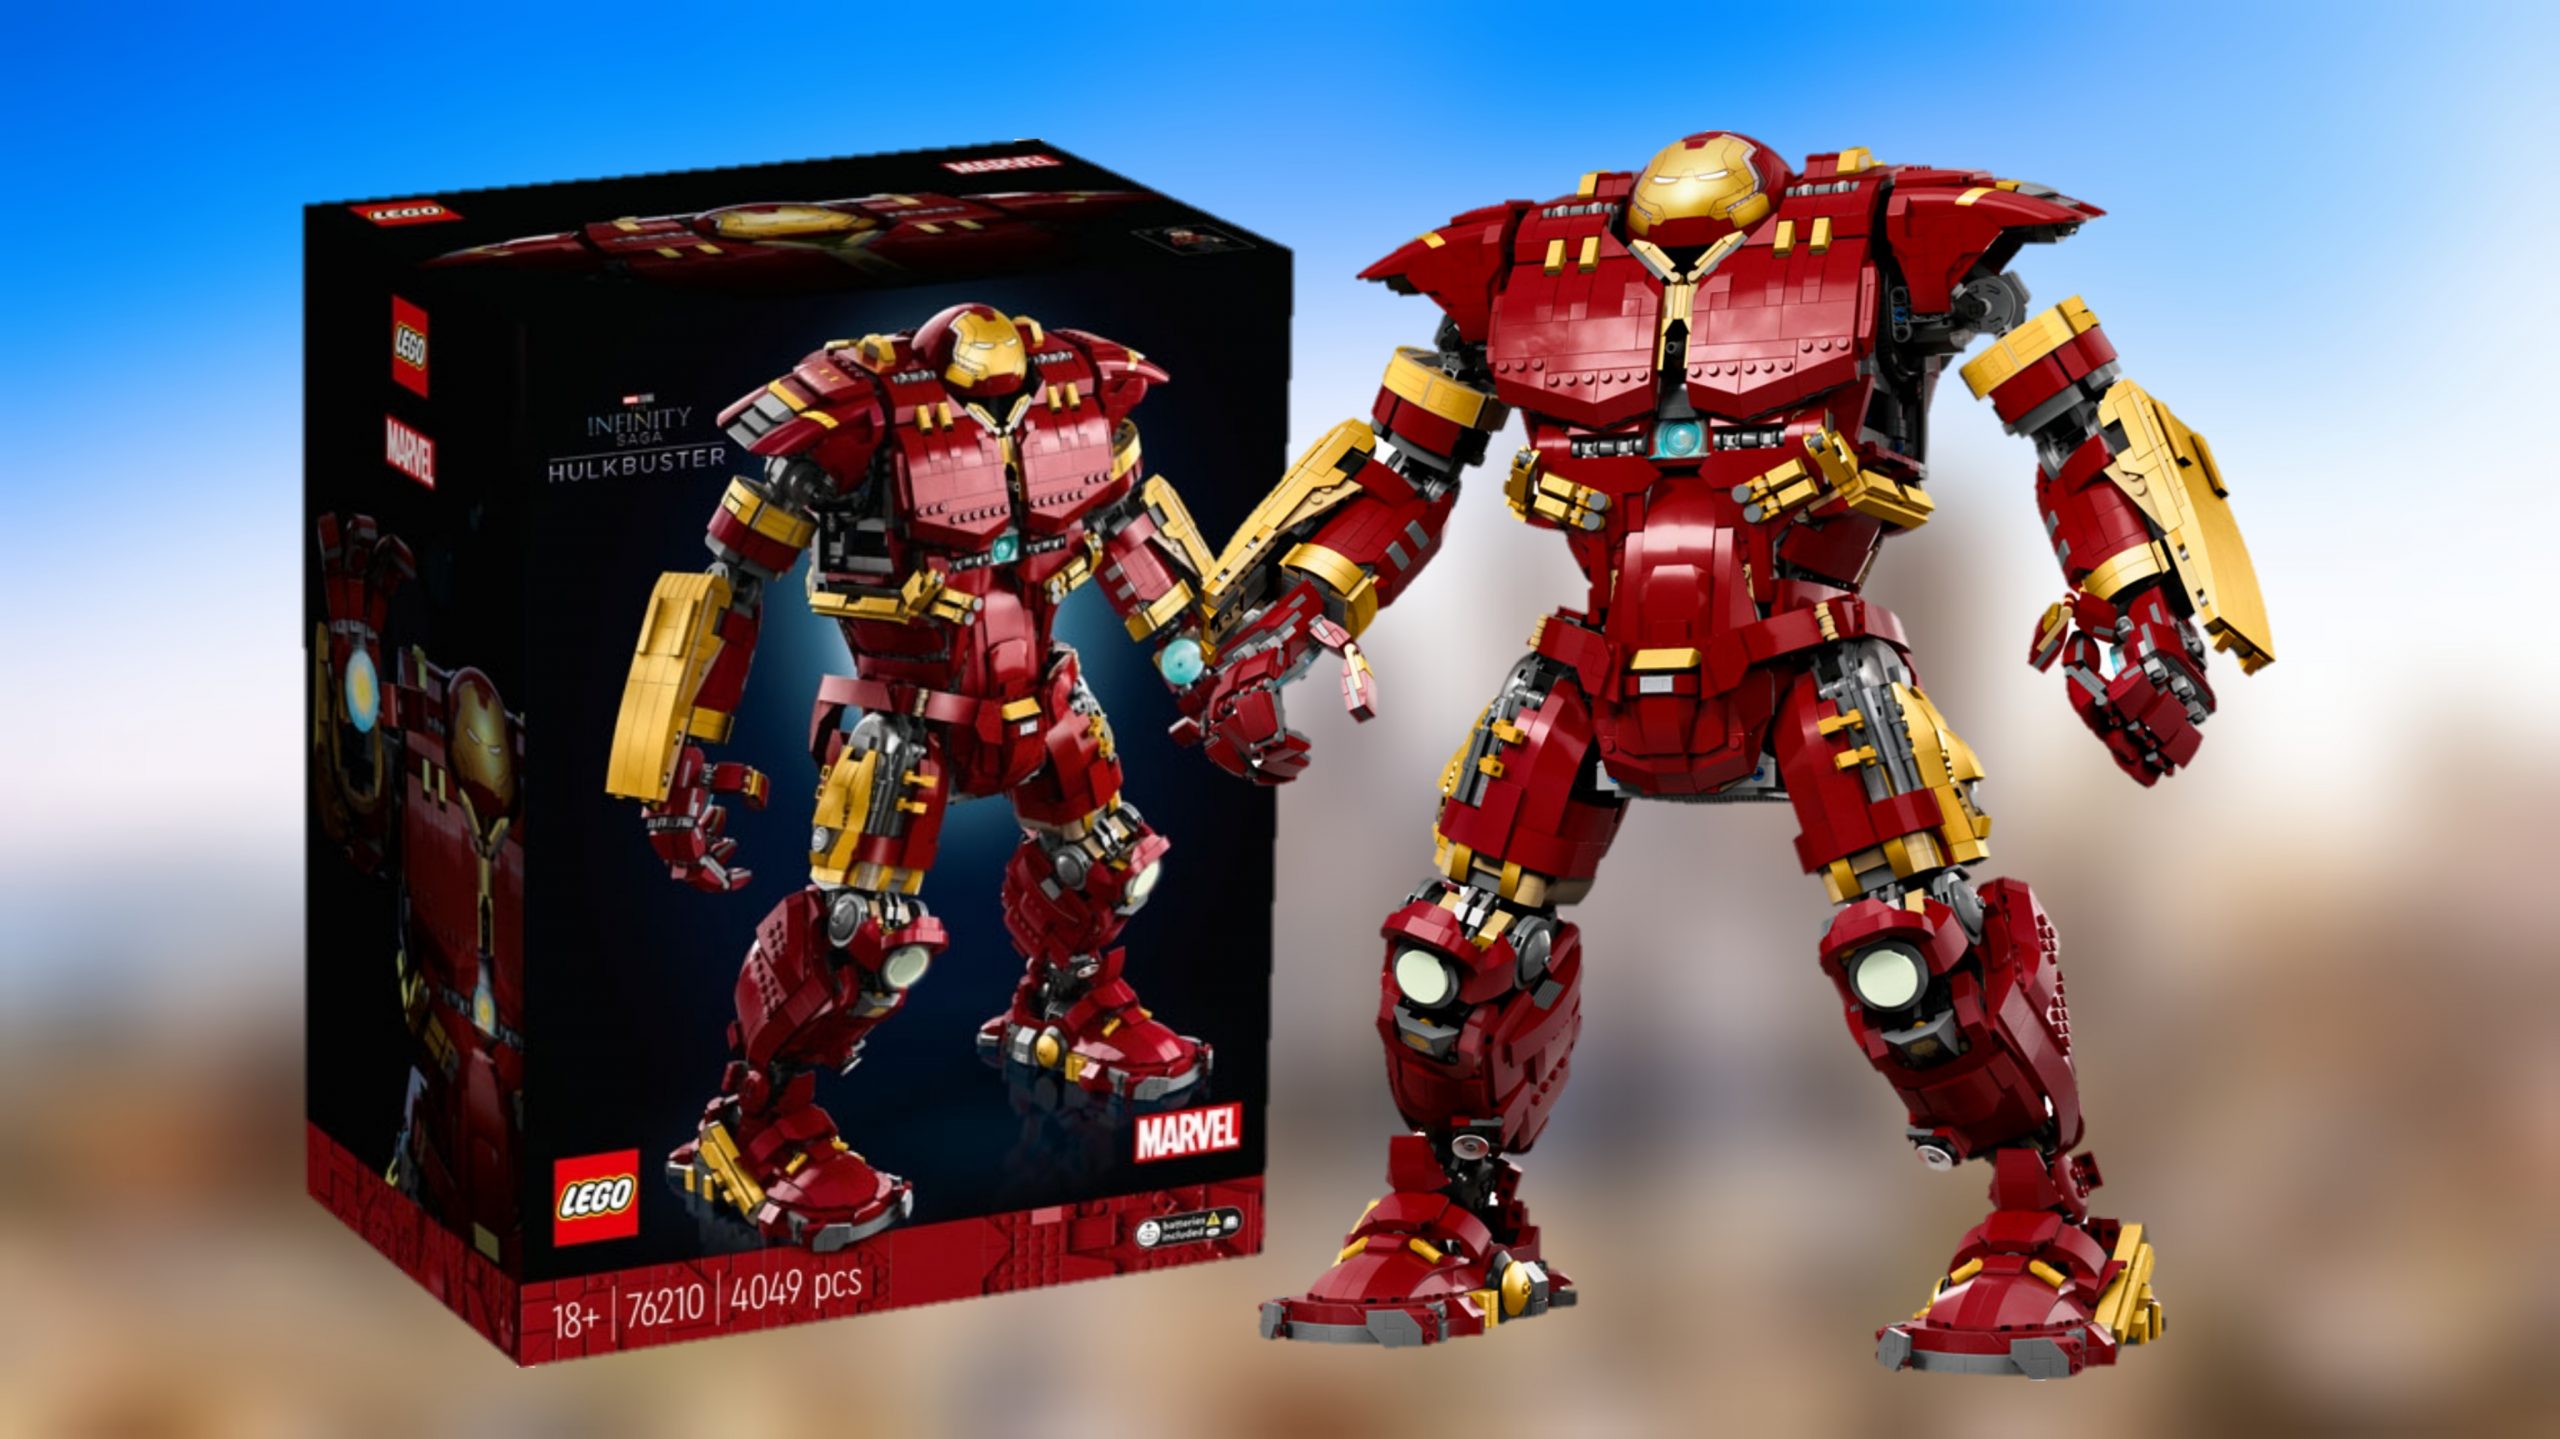 LEGO Marvel Hulkbuster (76210) Now Available! The Brick Post!